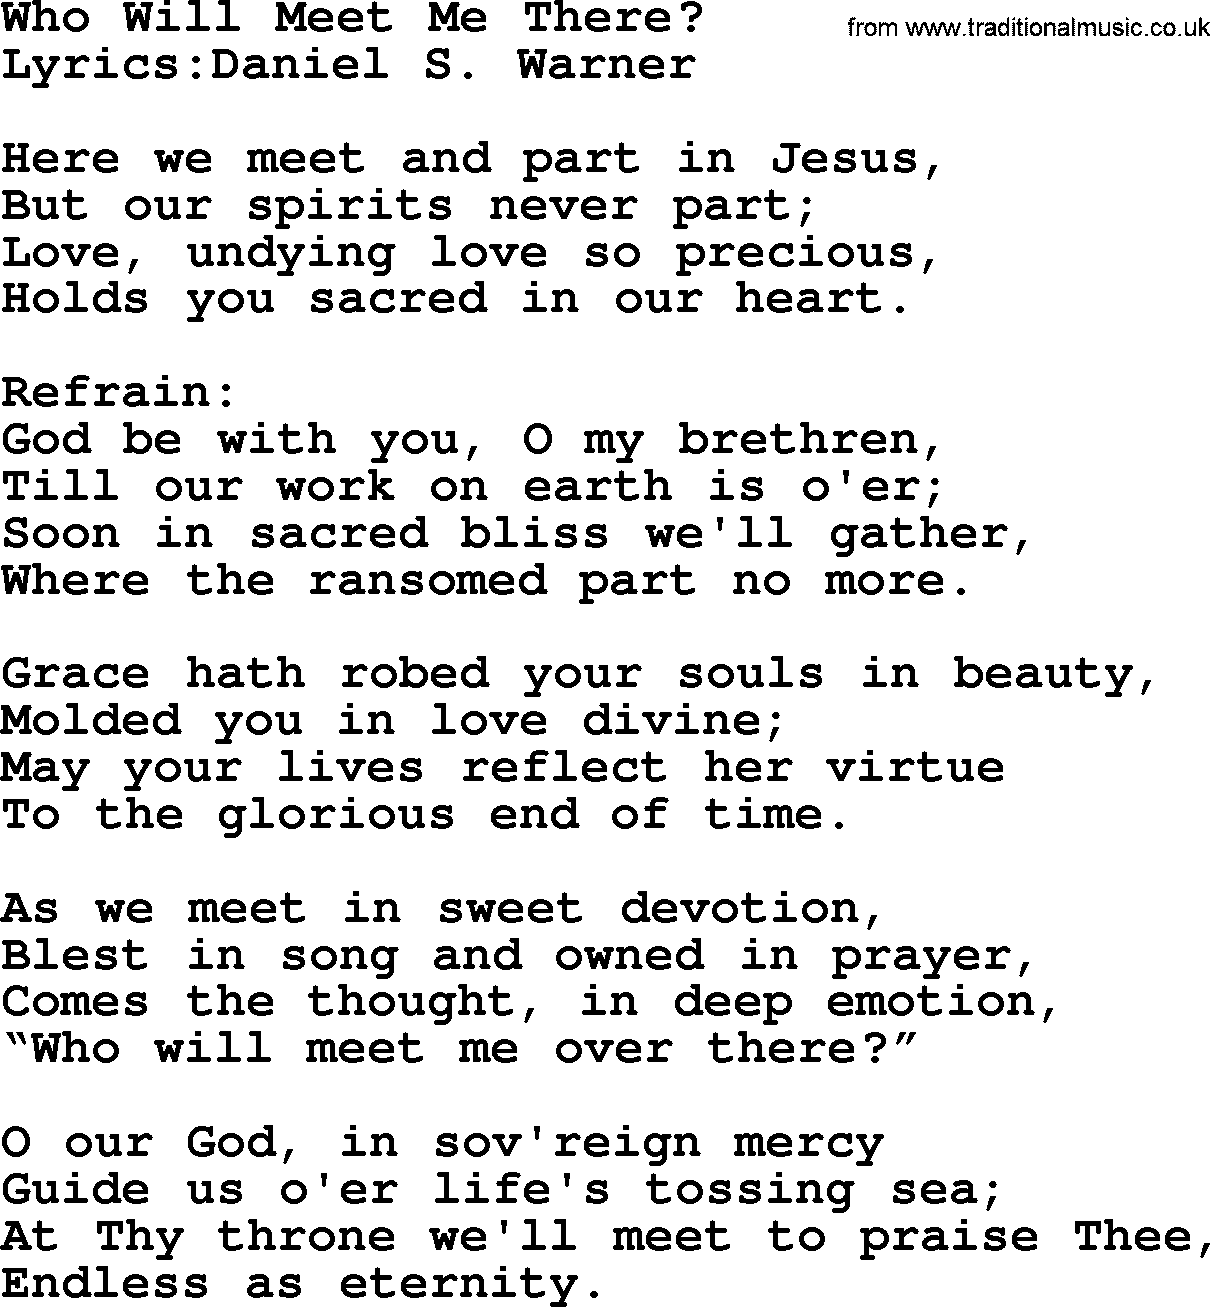 Songs and Hymns about Heaven: Who Will Meet Me There lyrics with PDF